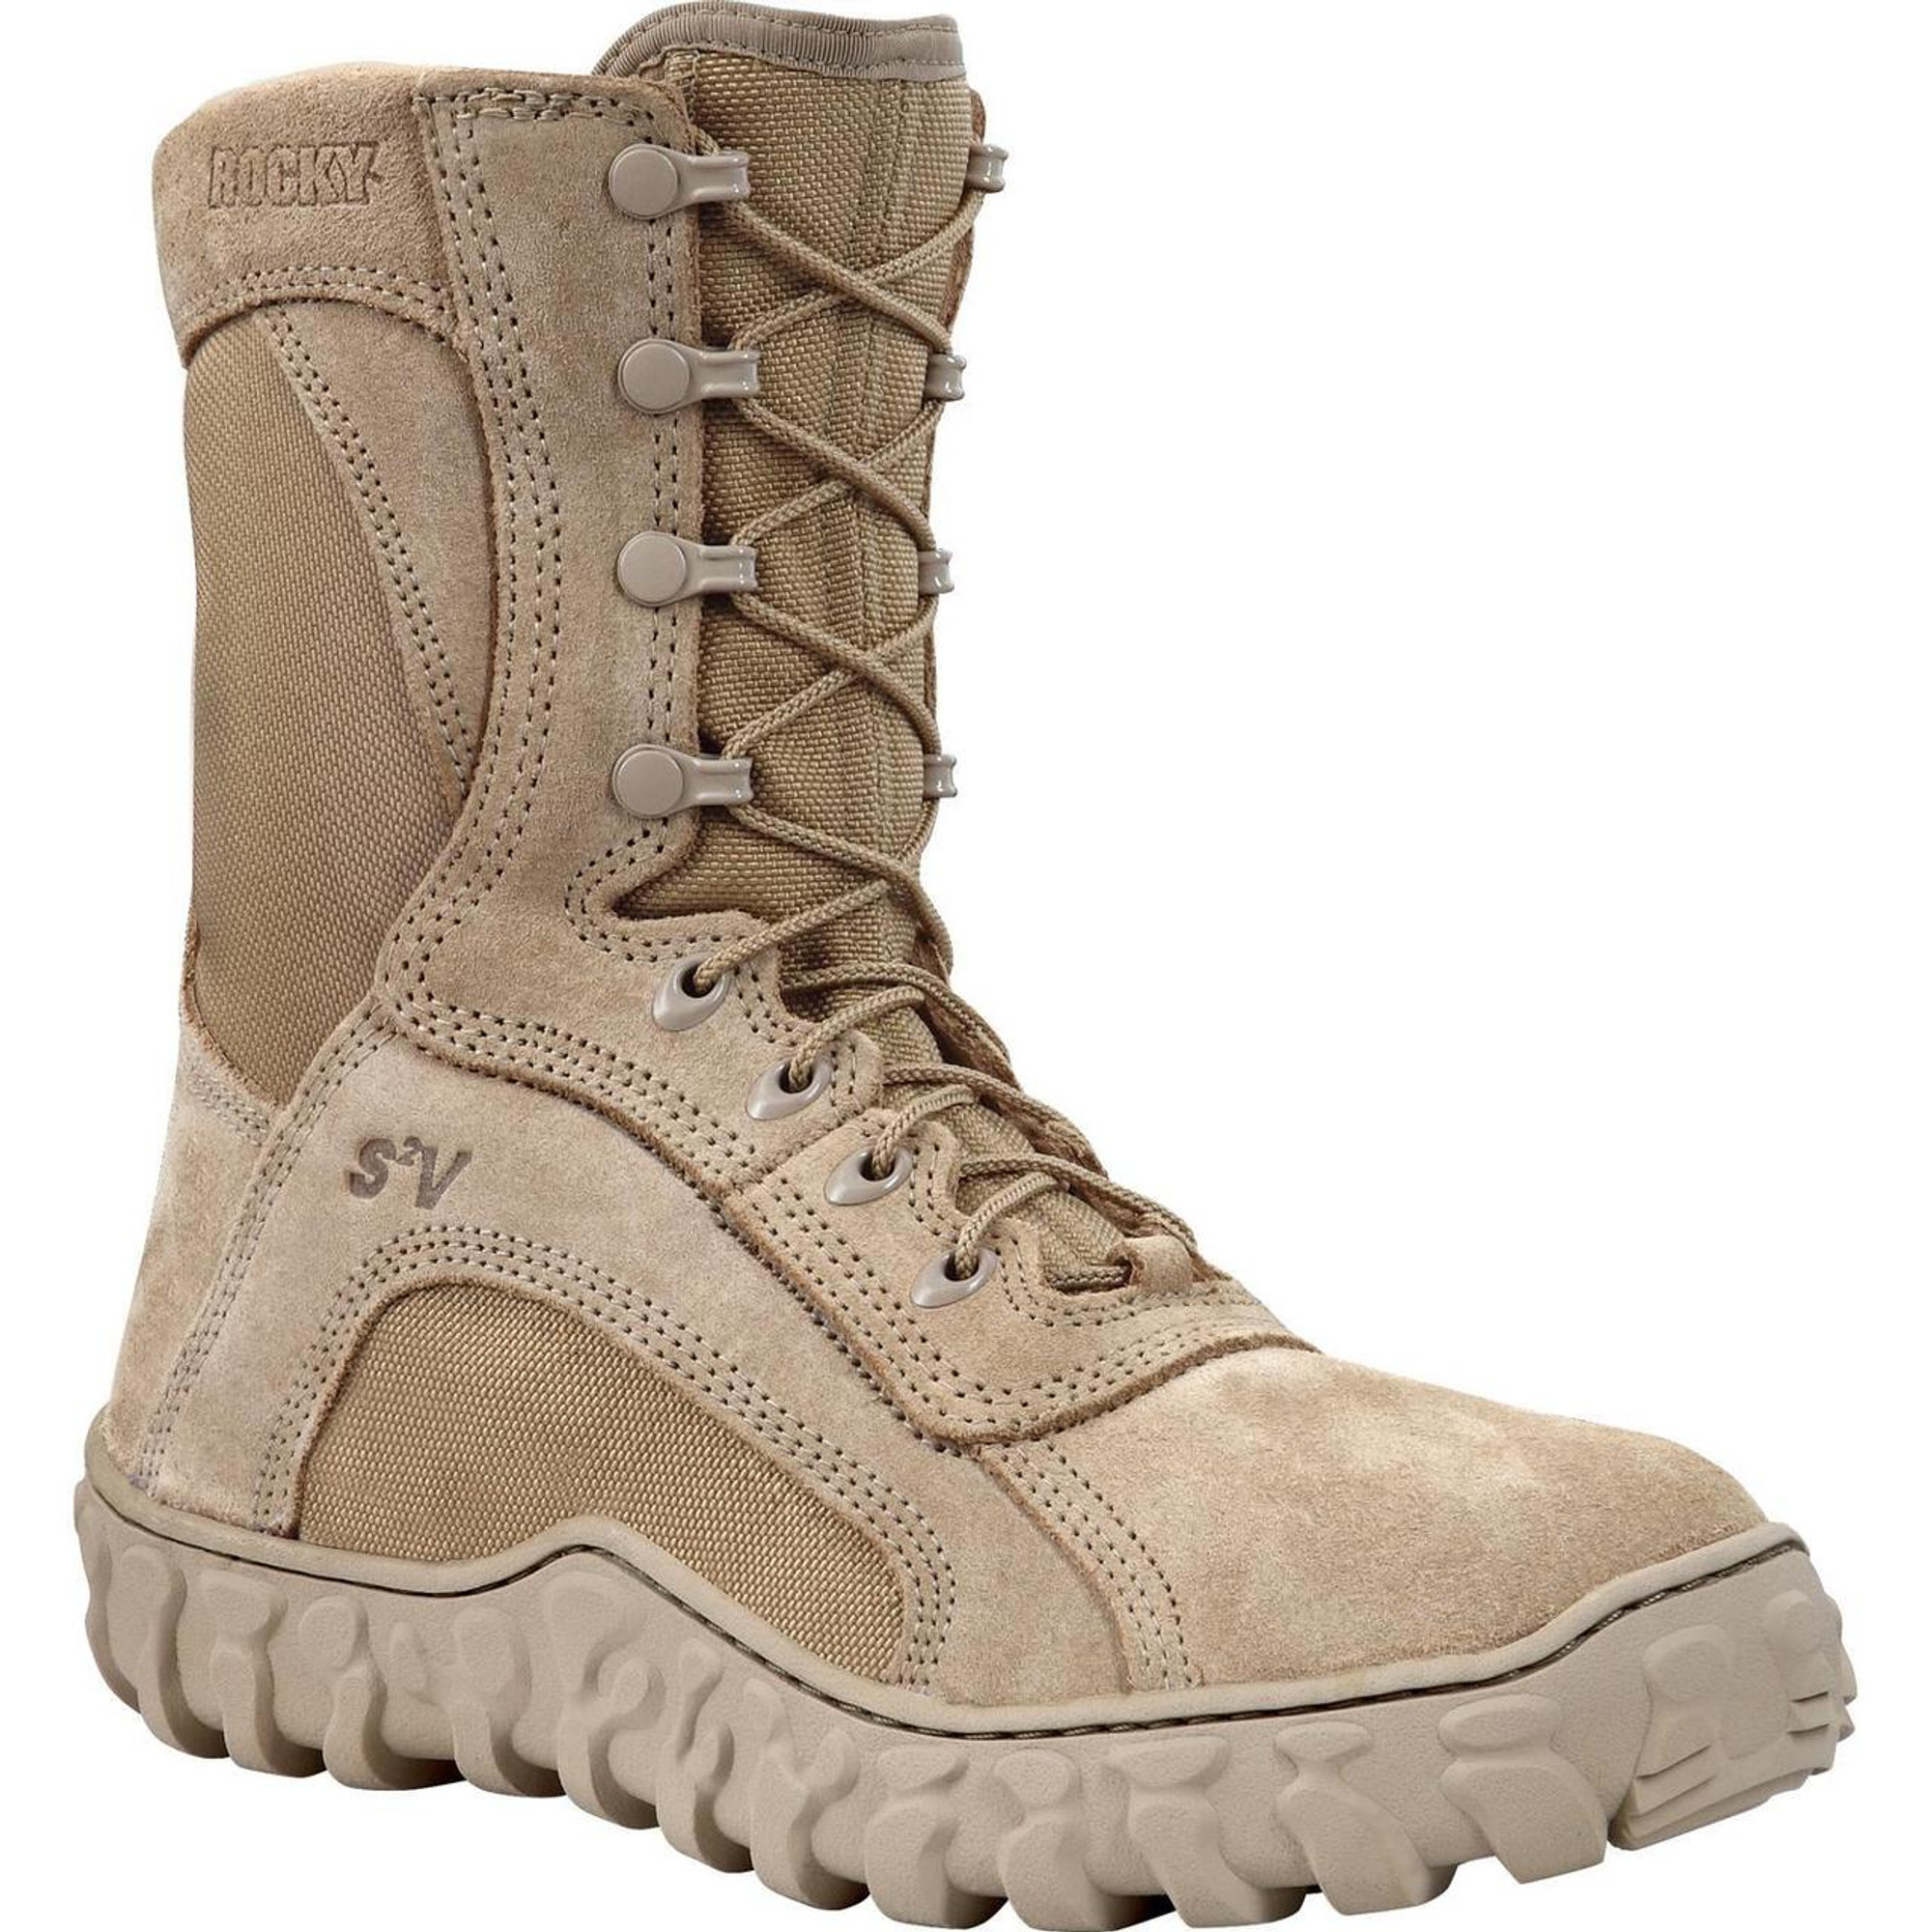 Rocky S2V GORE-TEX® Waterproof 400G Insulated Tactical Military Boot - Desert Tan